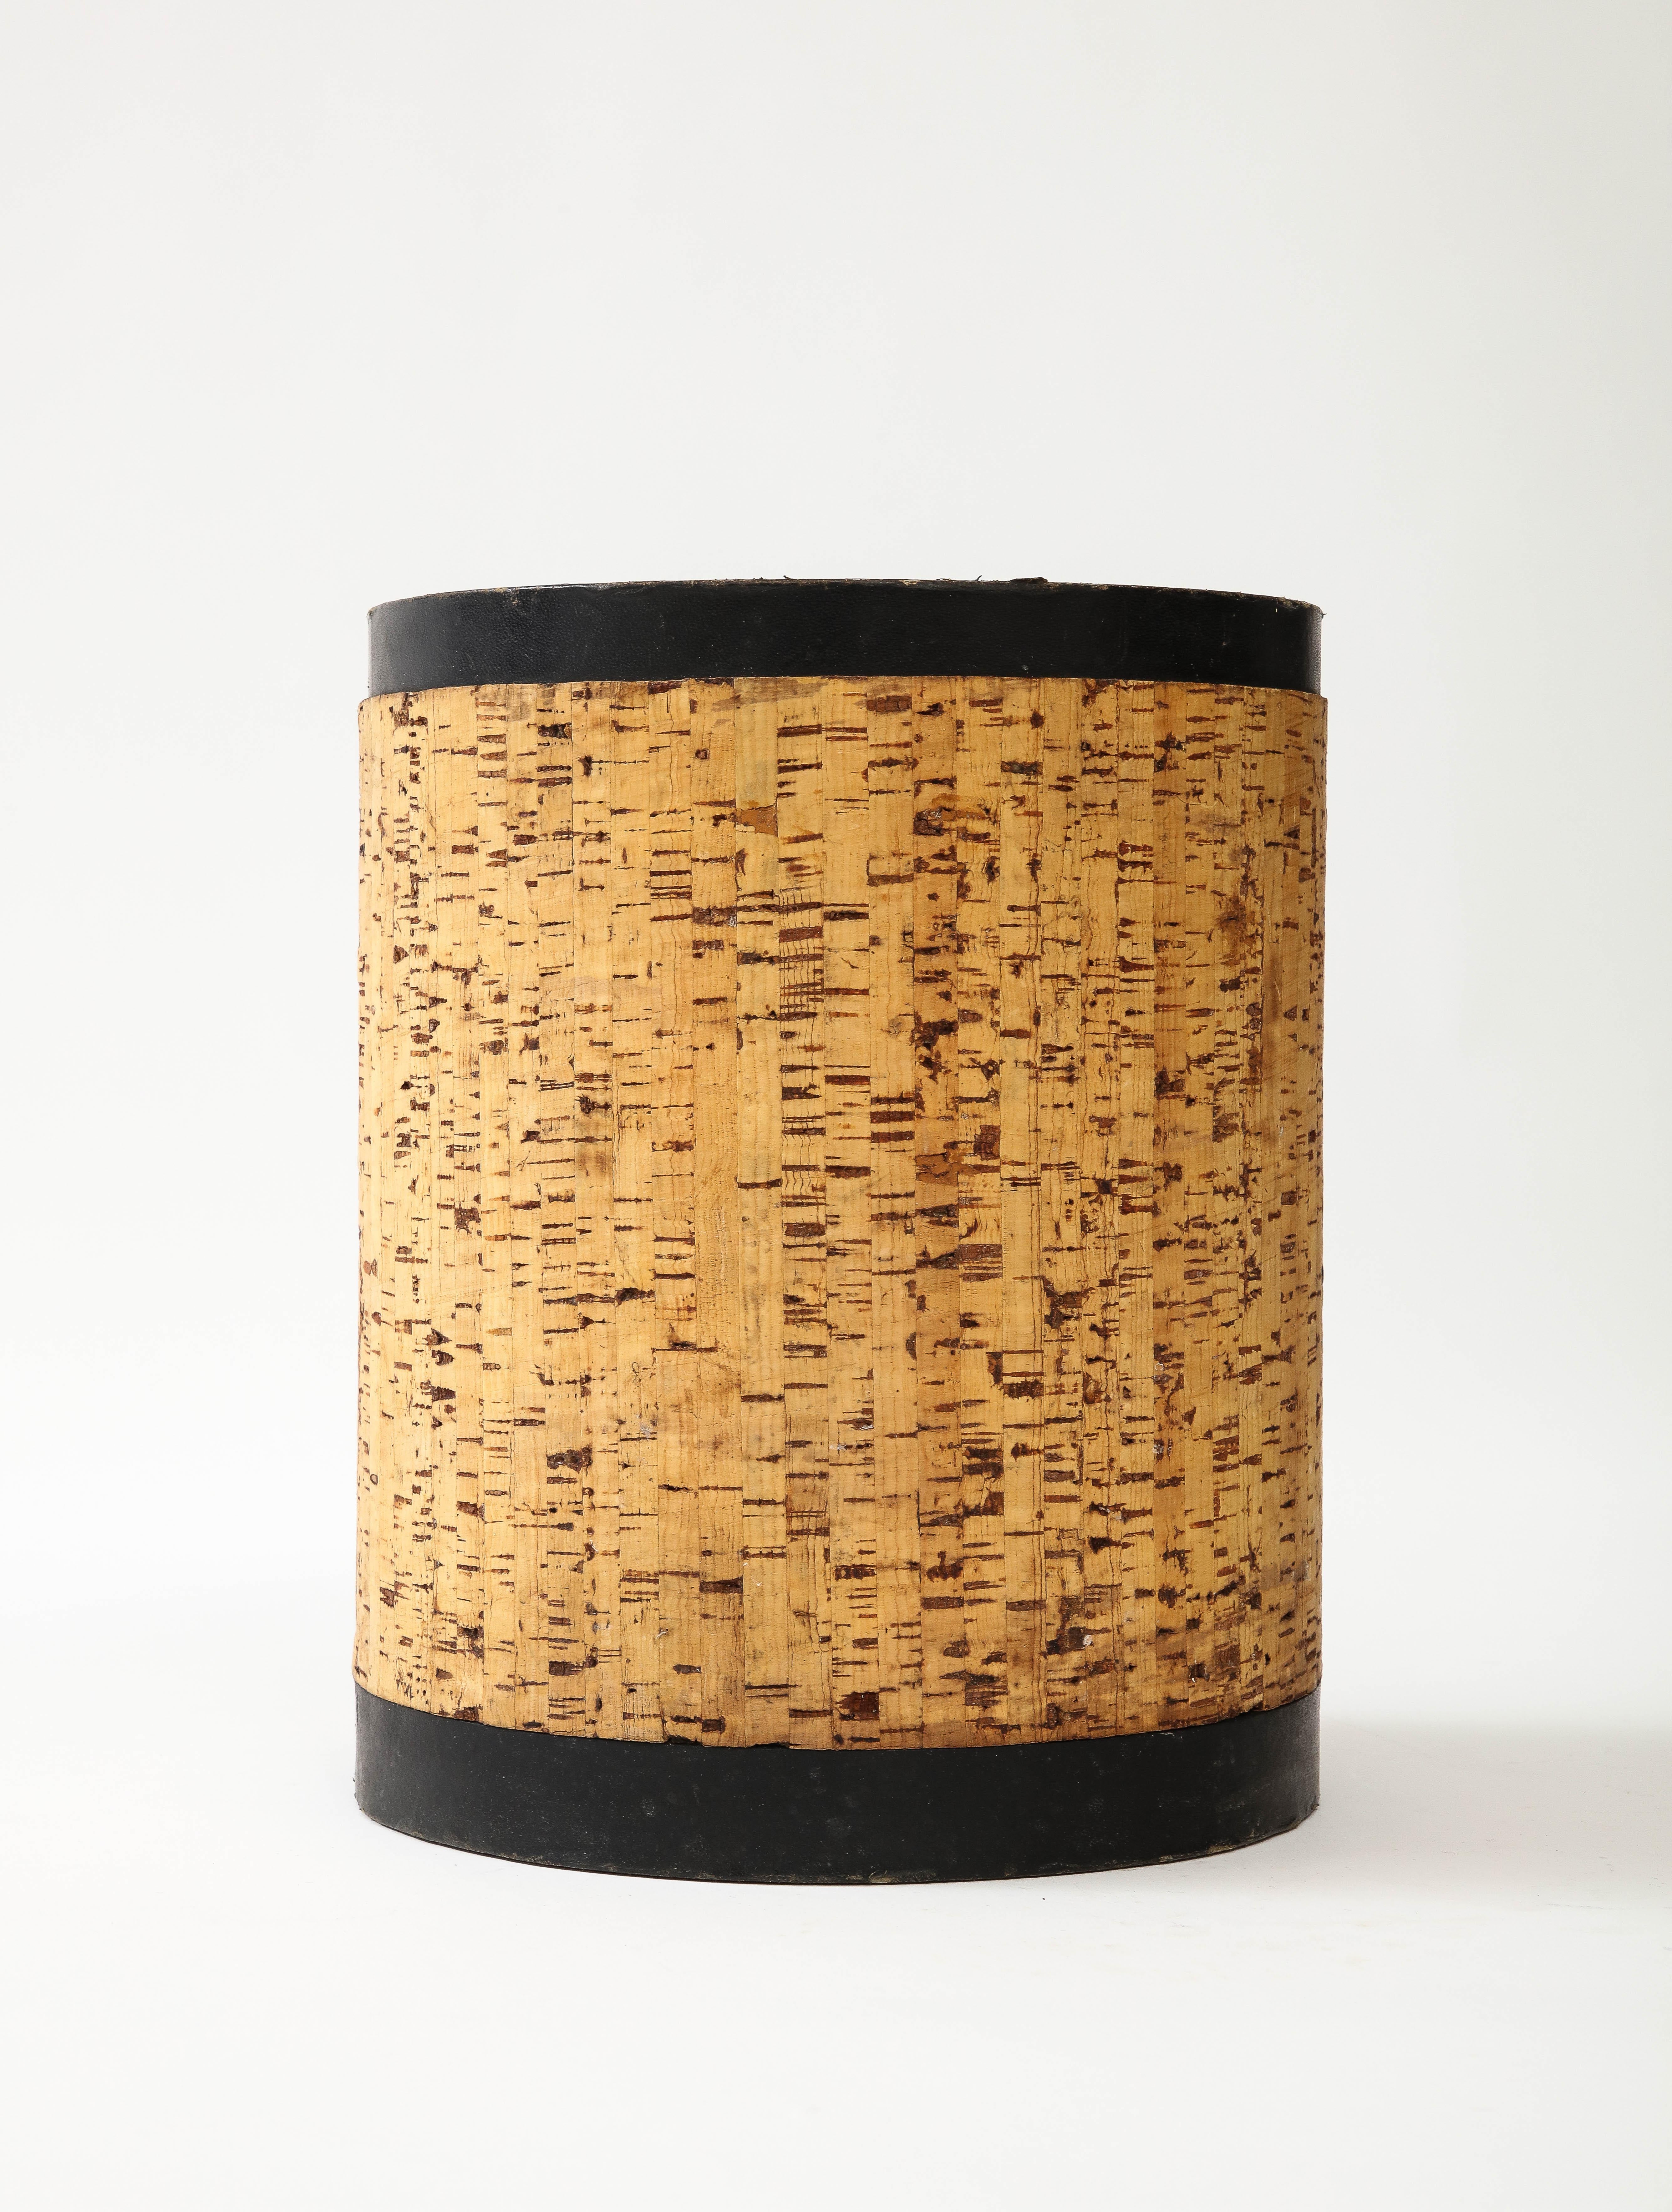 Mid-20th Century Cork & Leather Waster Paper Bin, Comptoir General des Gommes, France, 1950 For Sale